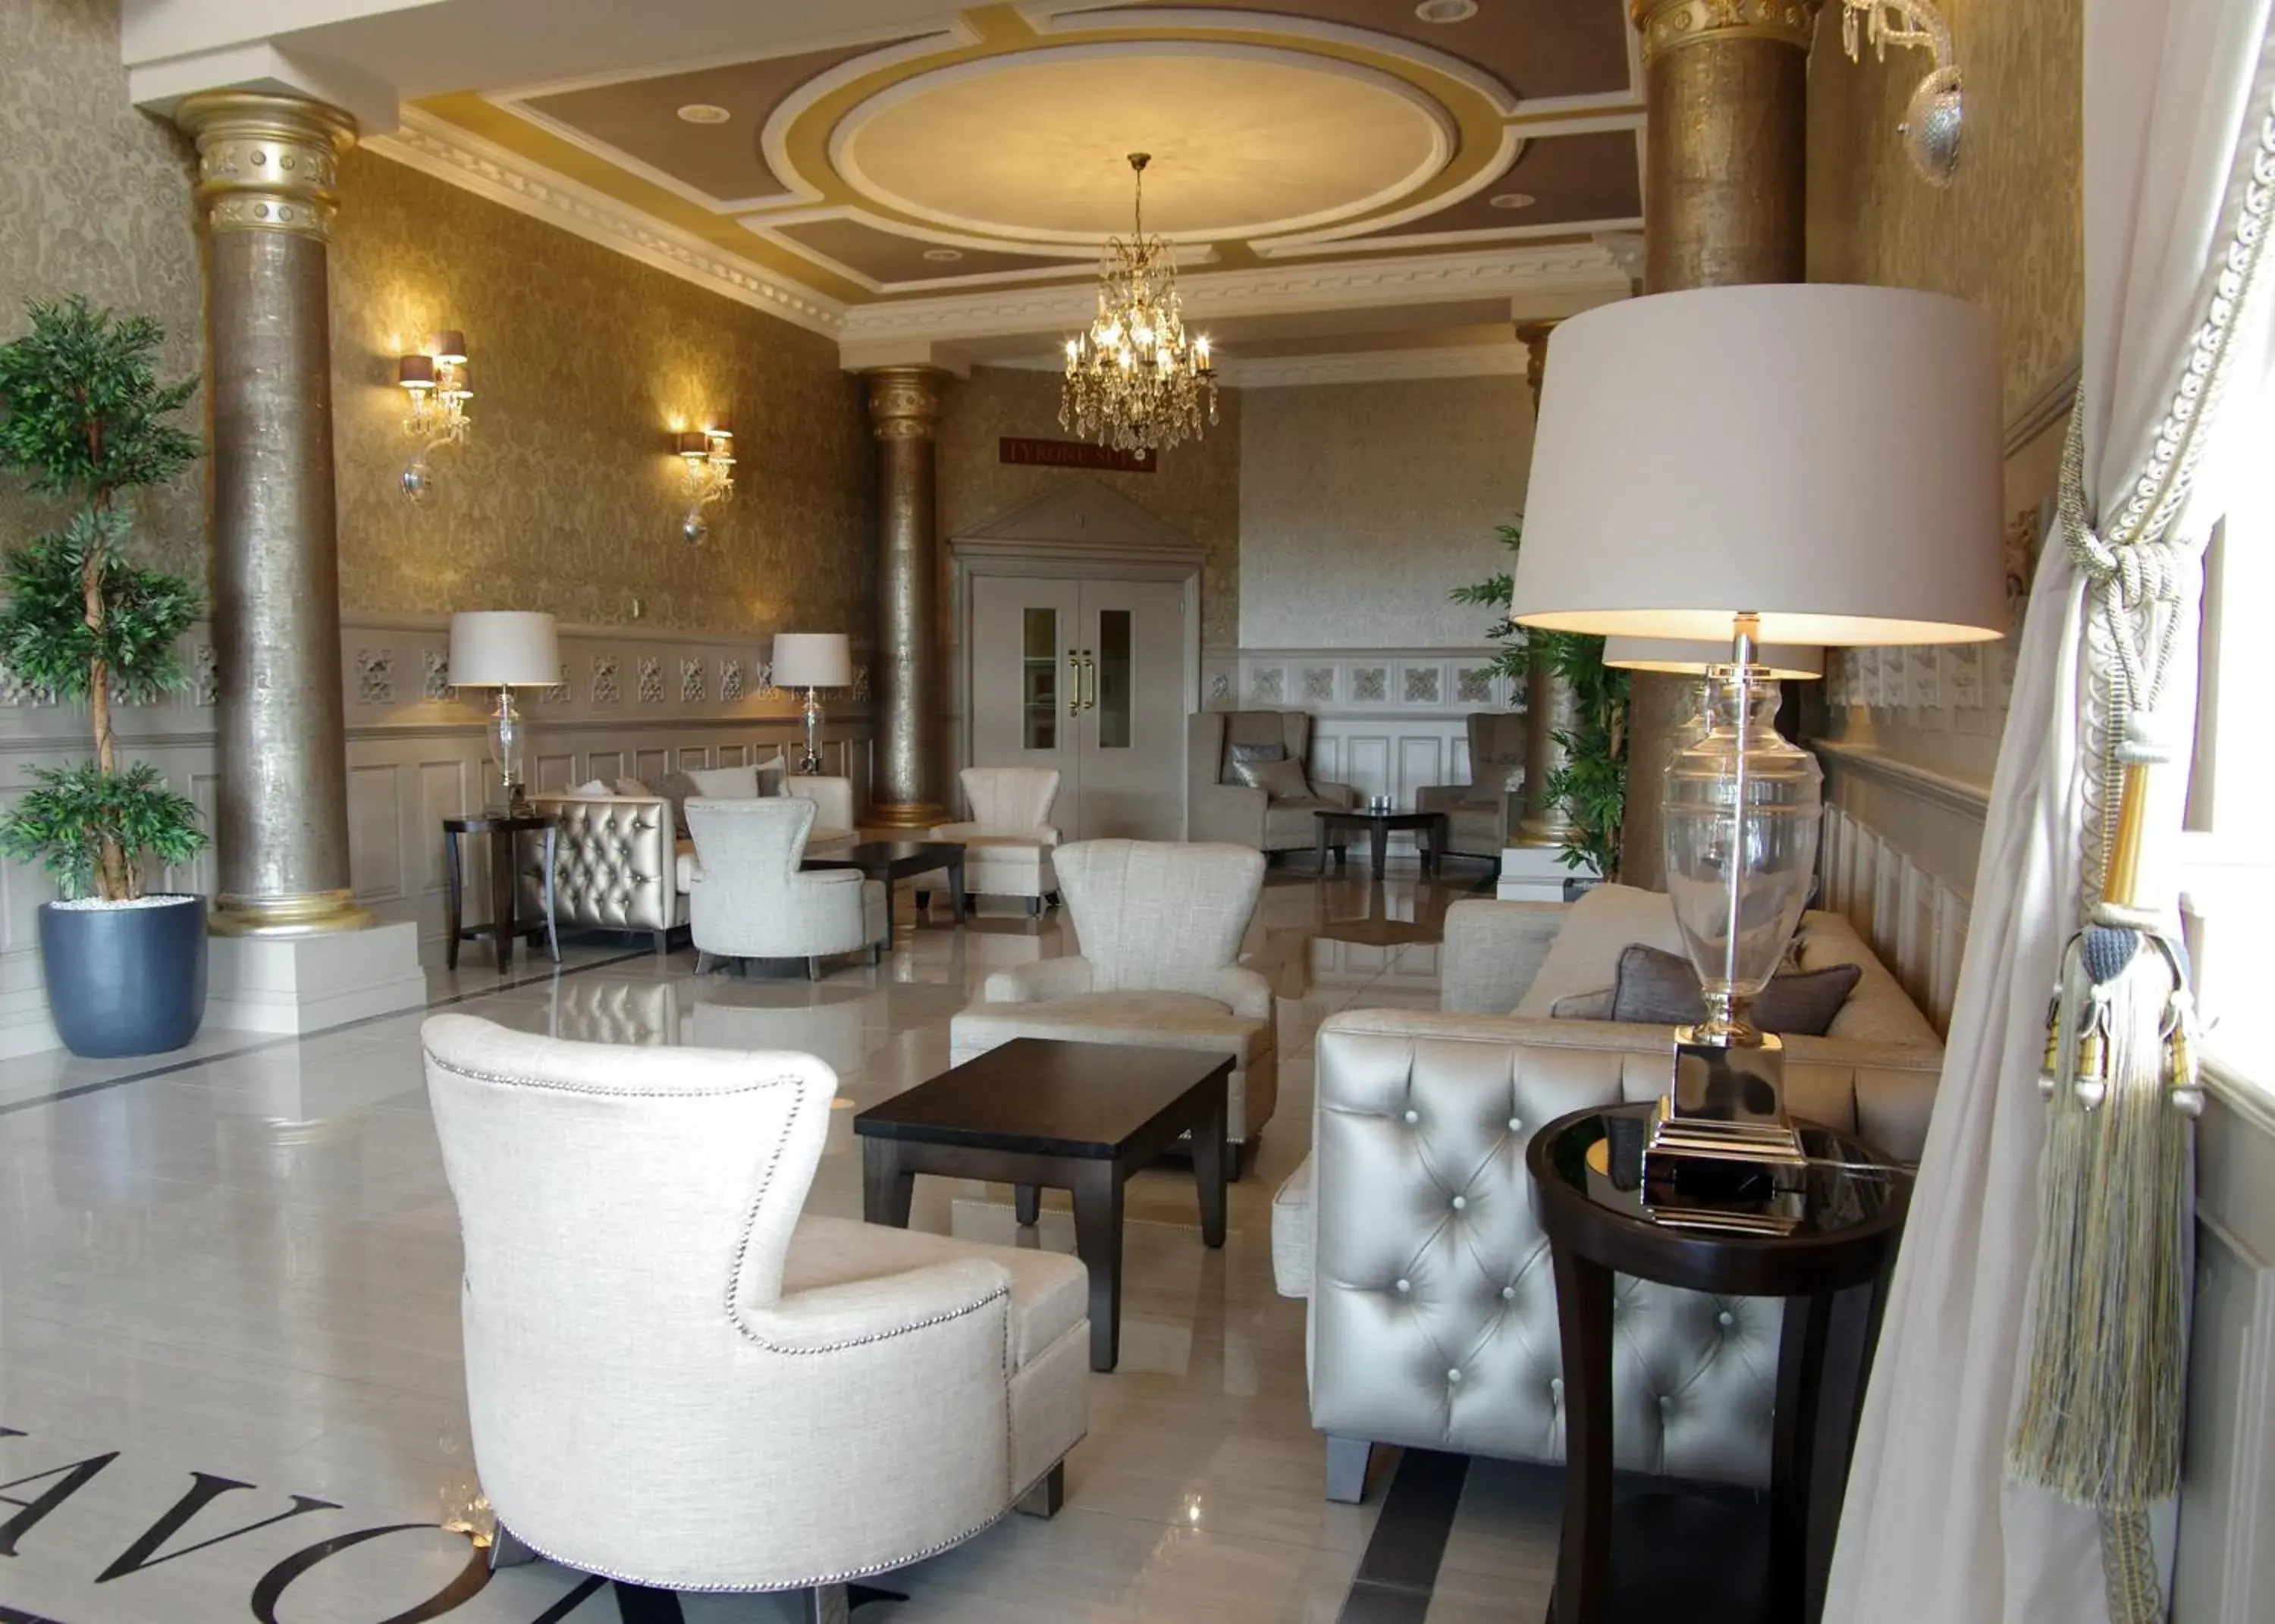 Area and facilities, Lounge/Bar in Glenavon House Hotel